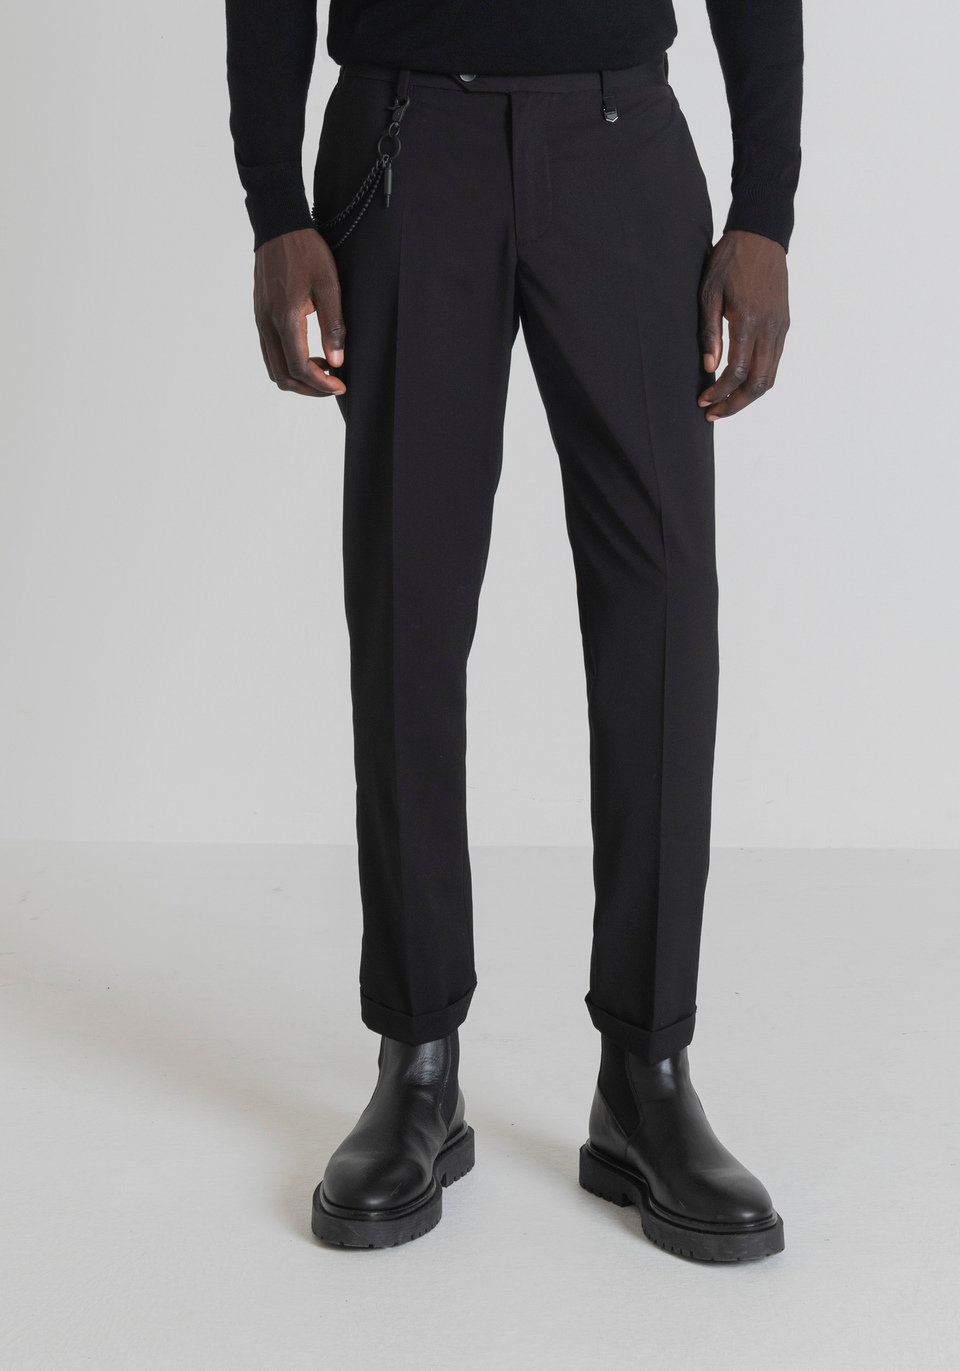 "RAD" SLIM-FIT ANKLE-LENGTH TROUSERS WITH CENTRAL CREASE - Antony Morato Online Shop